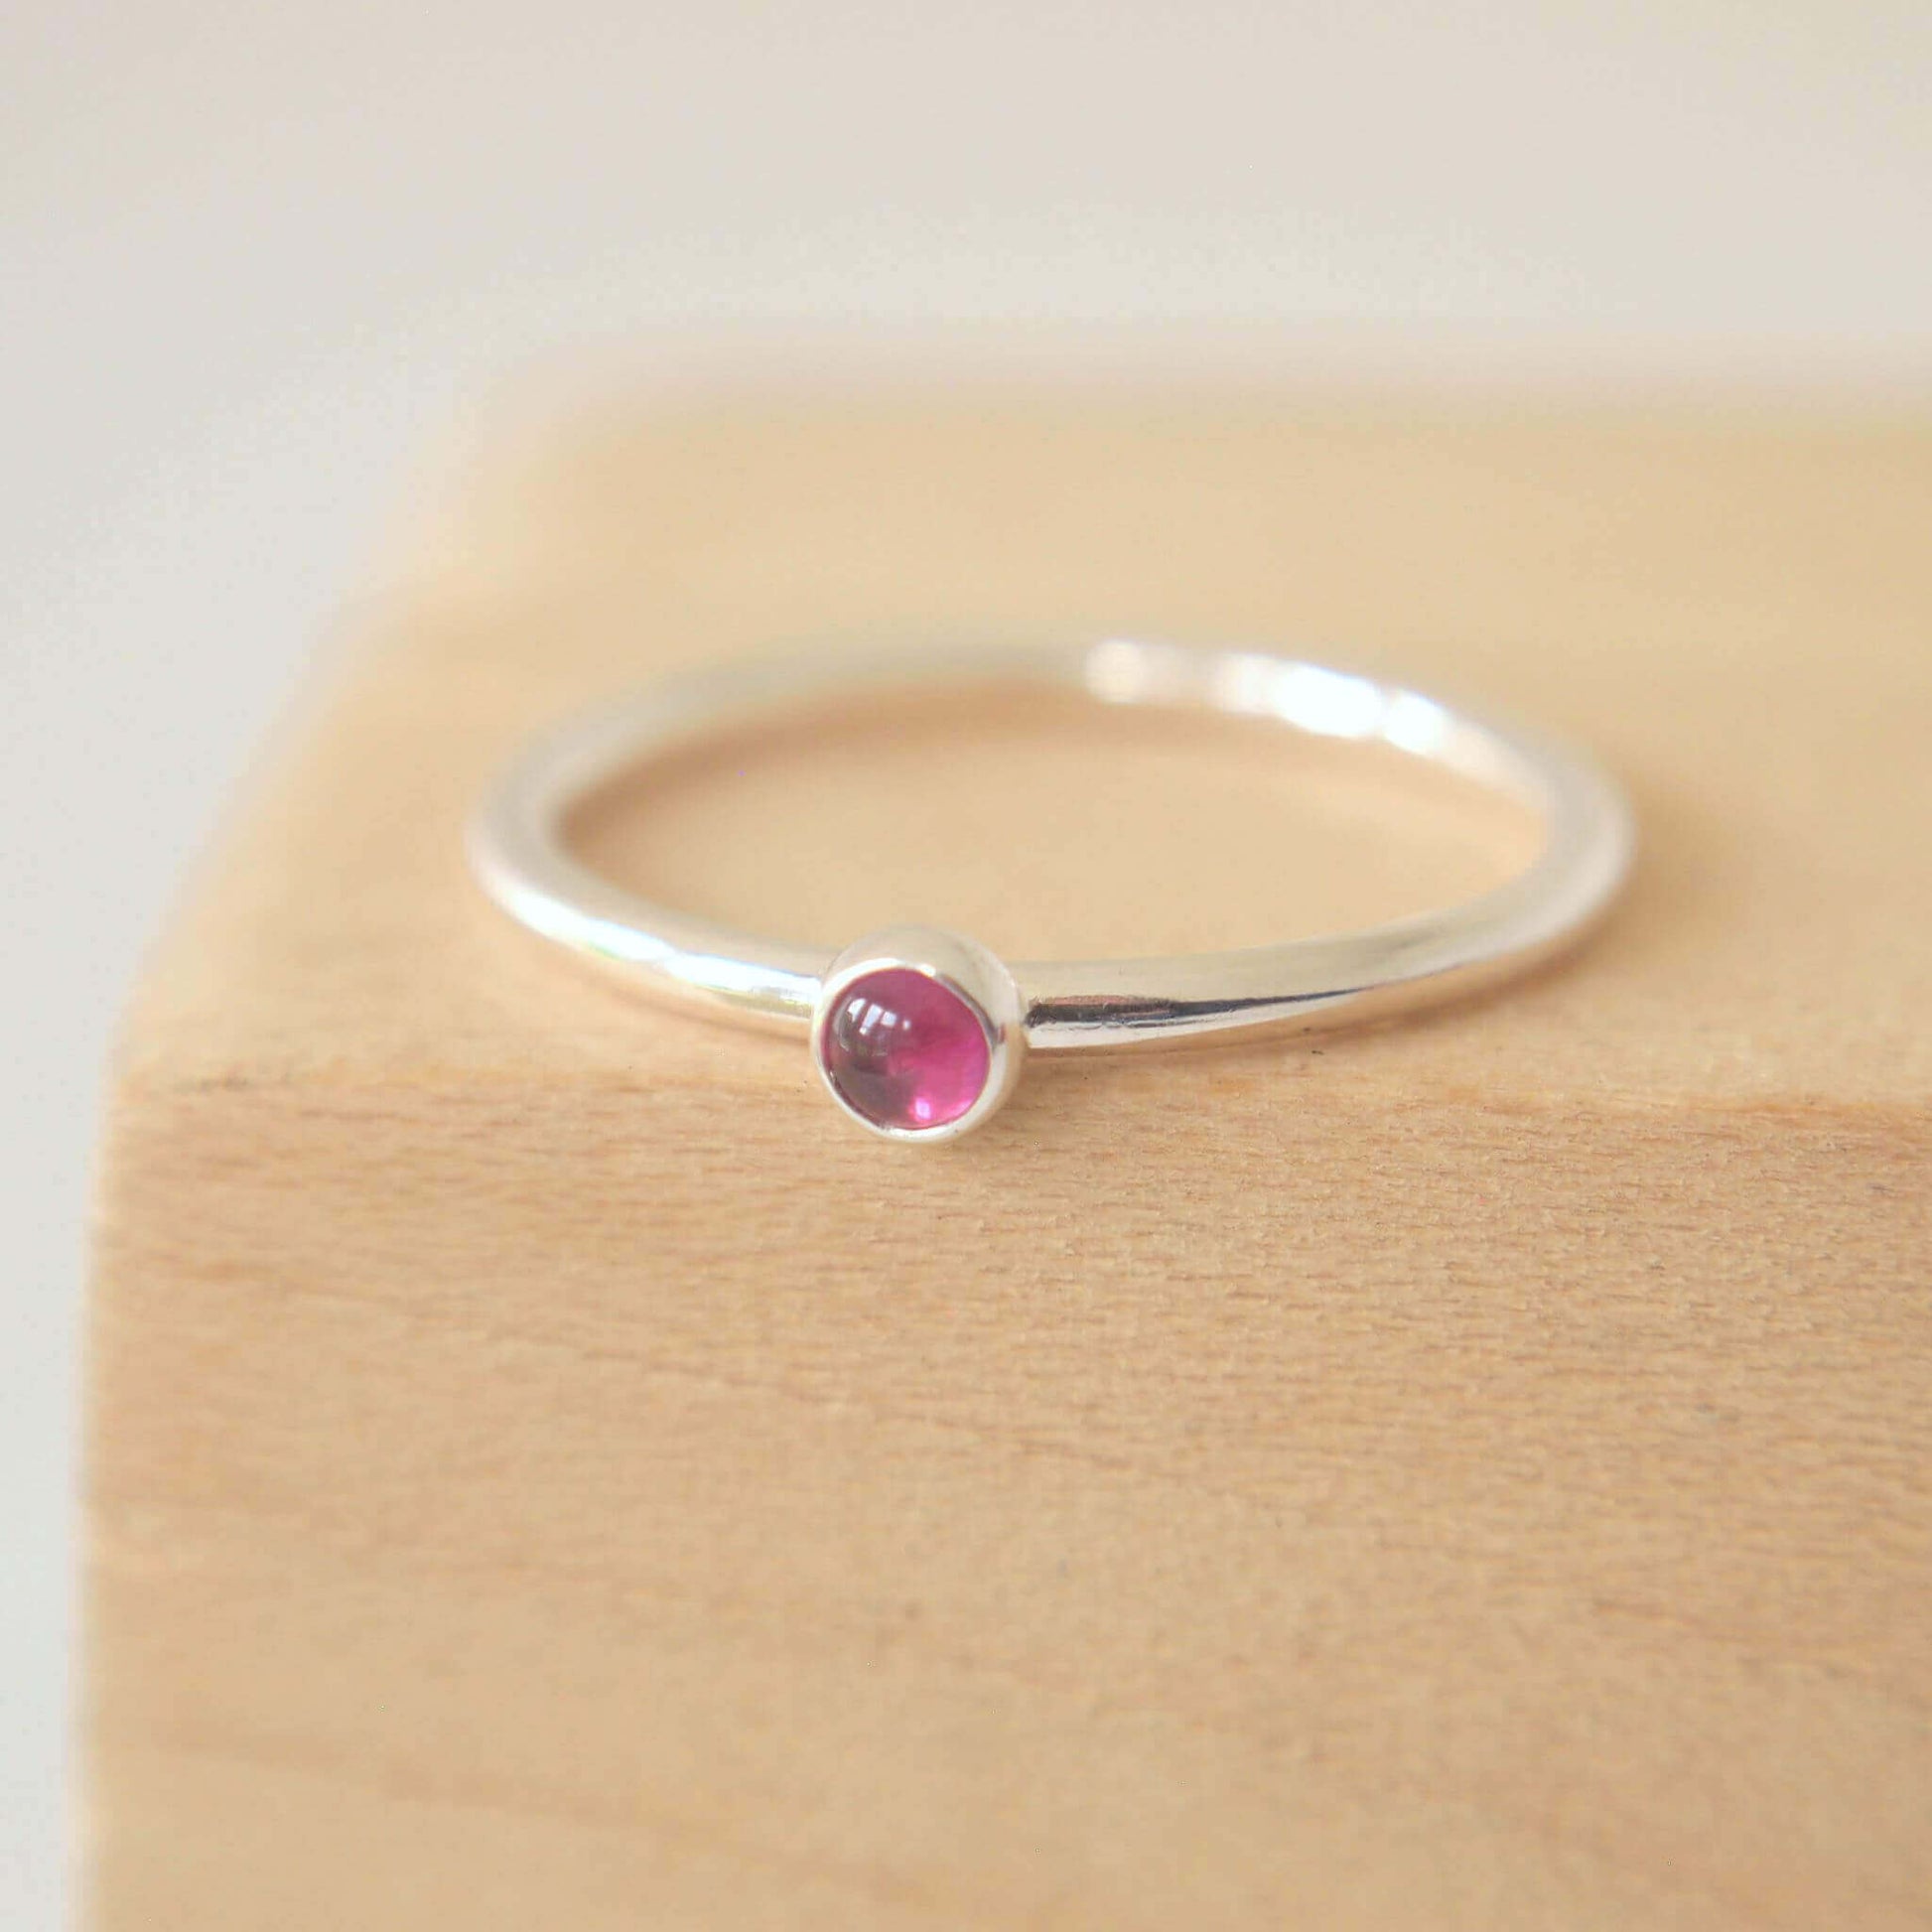 Single Solitaire simple style Sterling SIlver and A Lab Ruby pink Cabochon ring. The lab ruby gemstone is round and measure 3mm and it's set onto a band of fully round wire. It can be made to measure in any size. Handmade in Scotland by Maram Jewellery